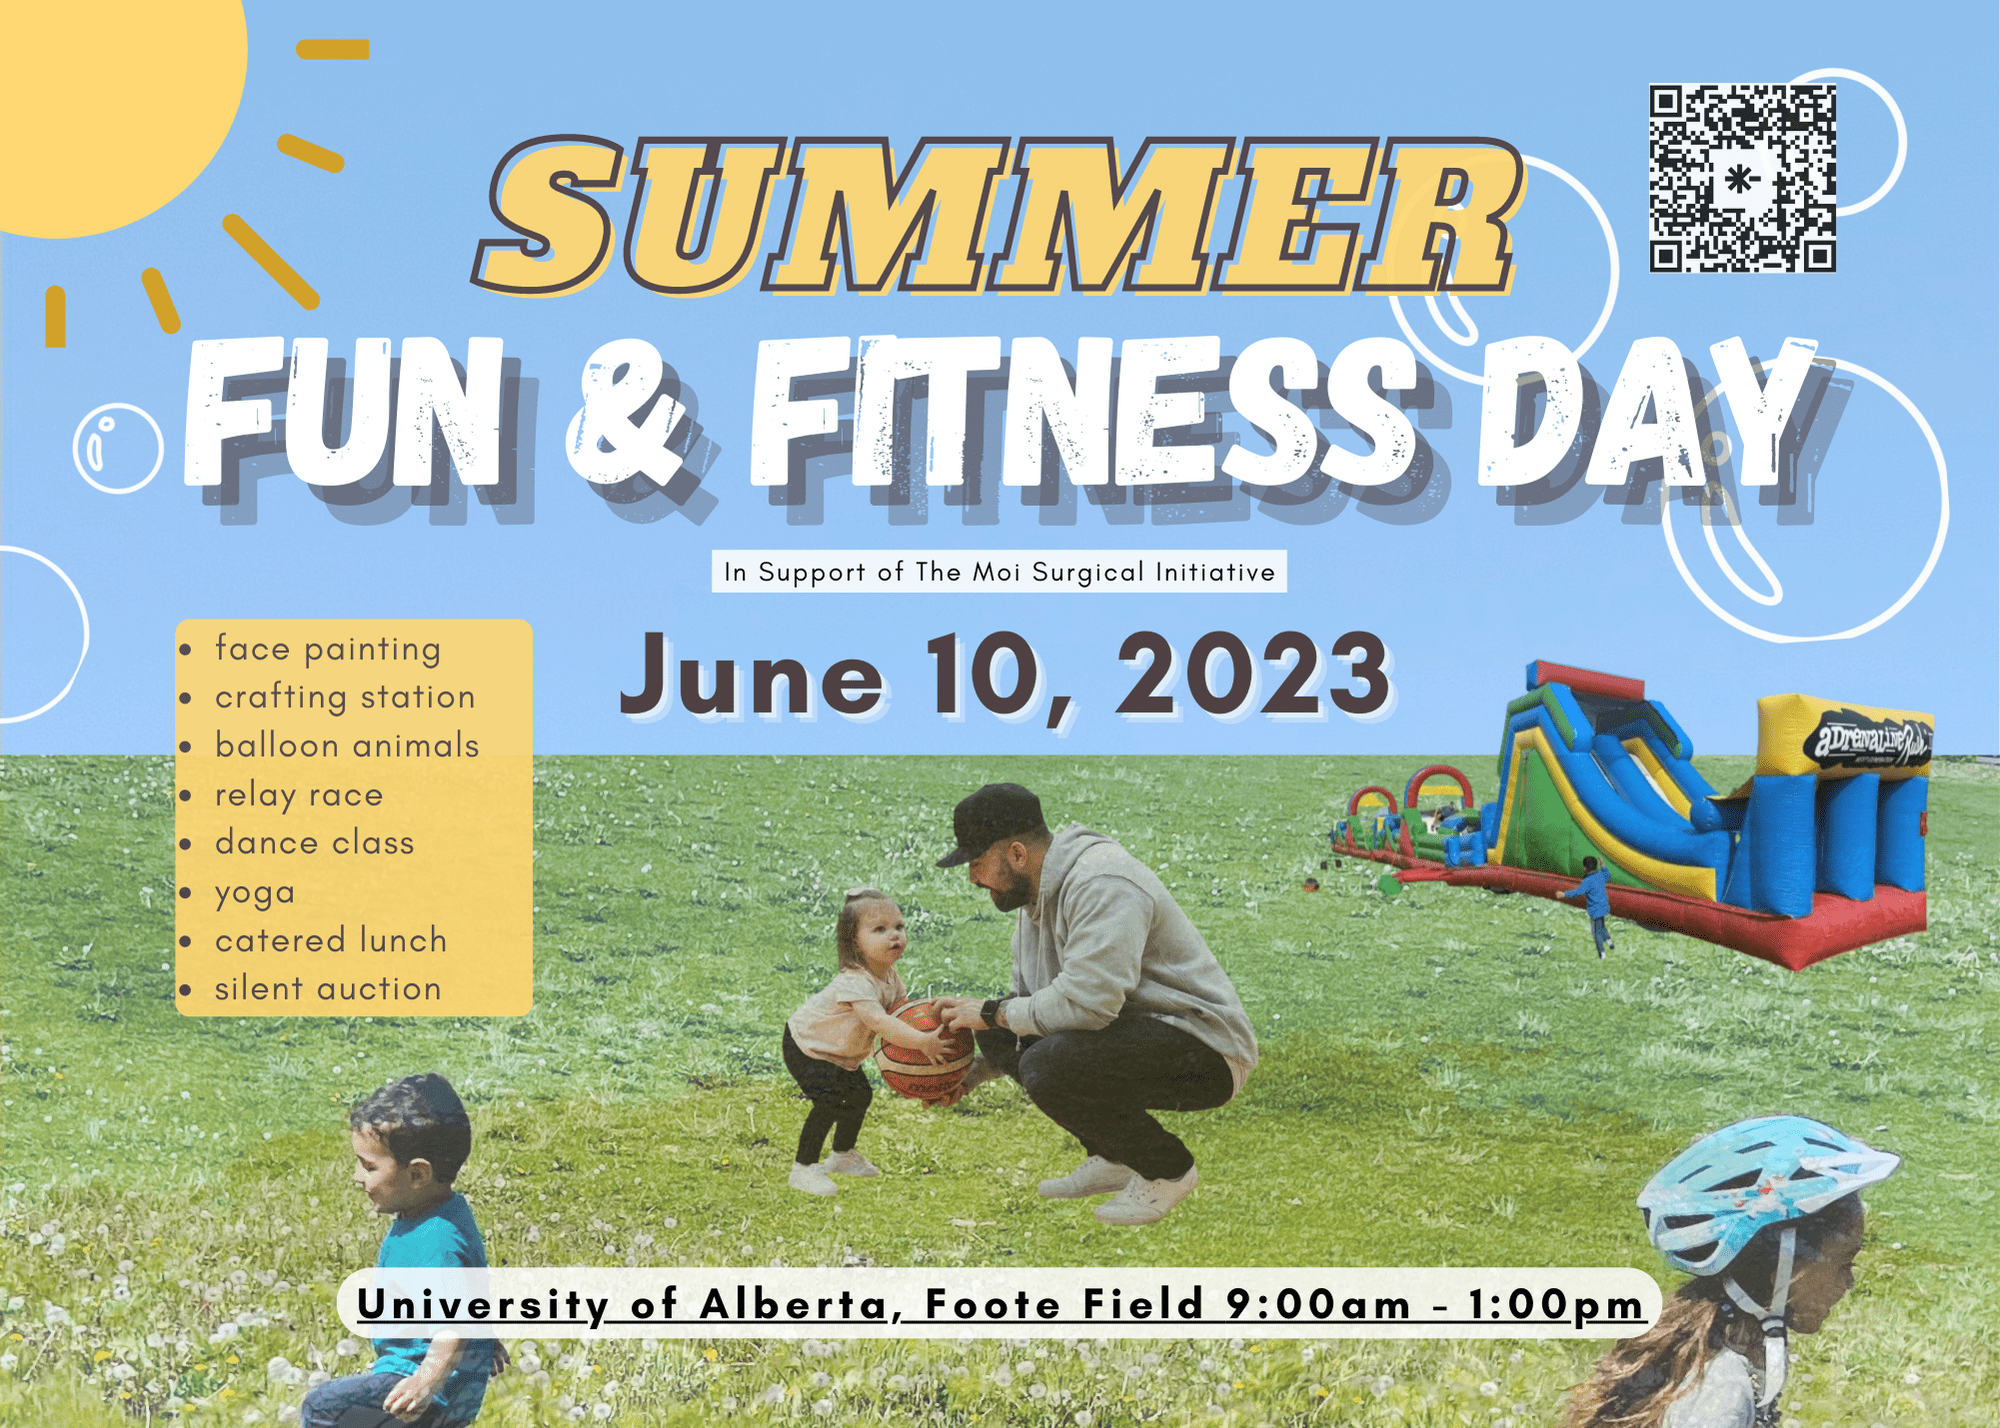 Summer Fun & Fitness Day Foote Field